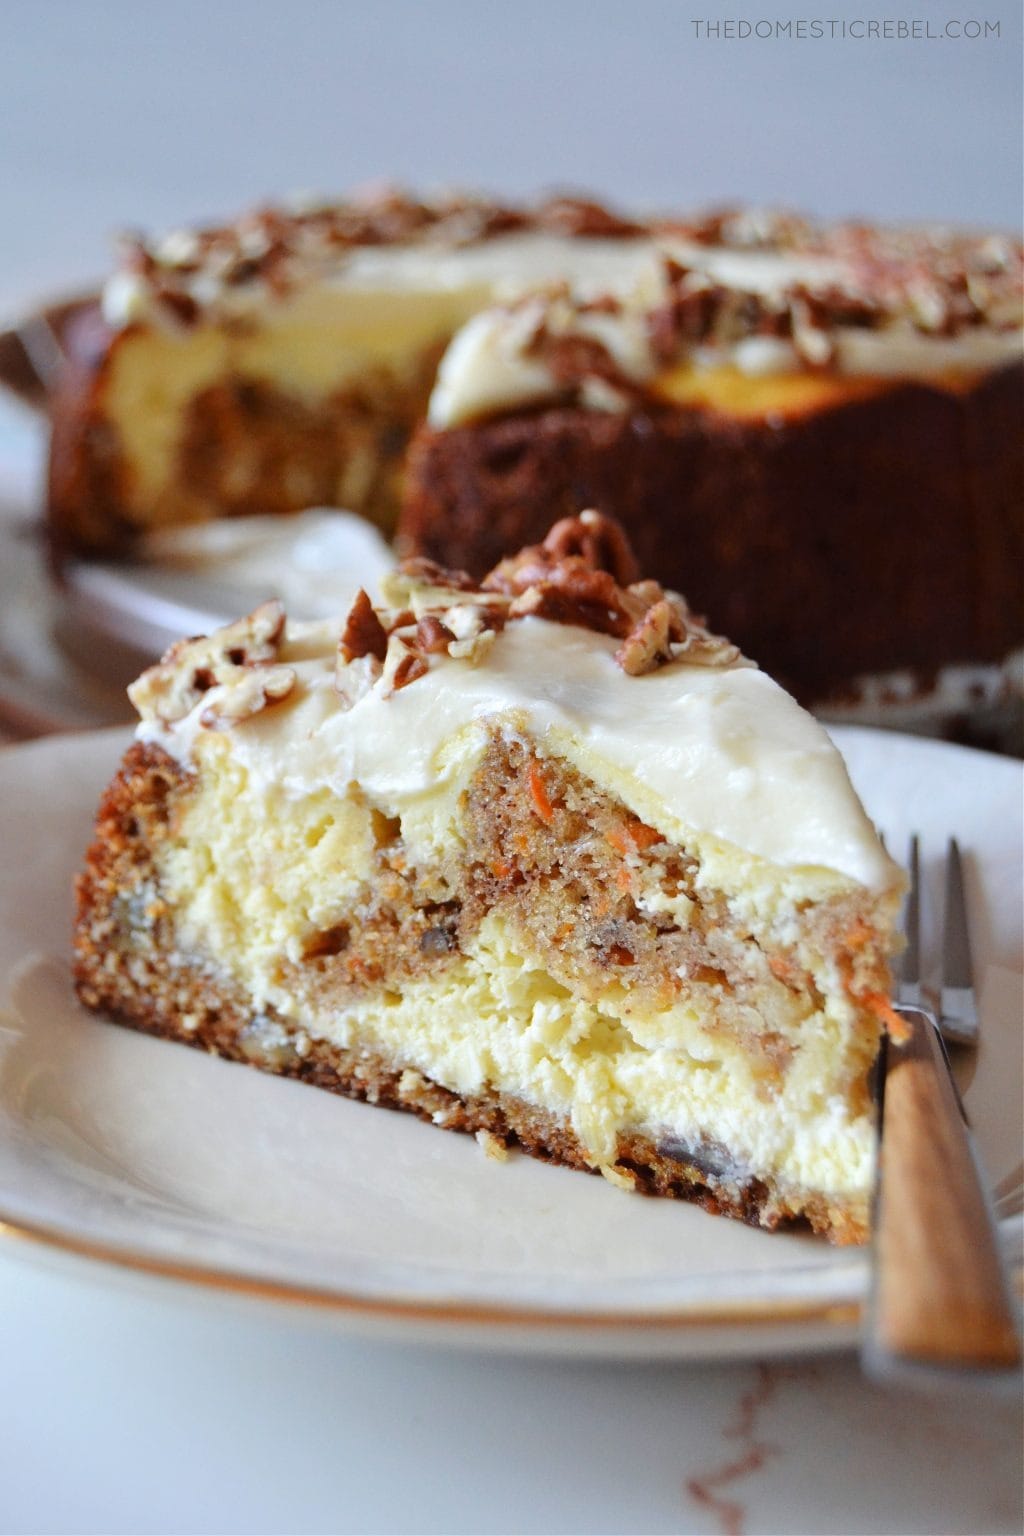 A slice of Carrot Cake Cheesecake on a saucer with chopped pecans on top